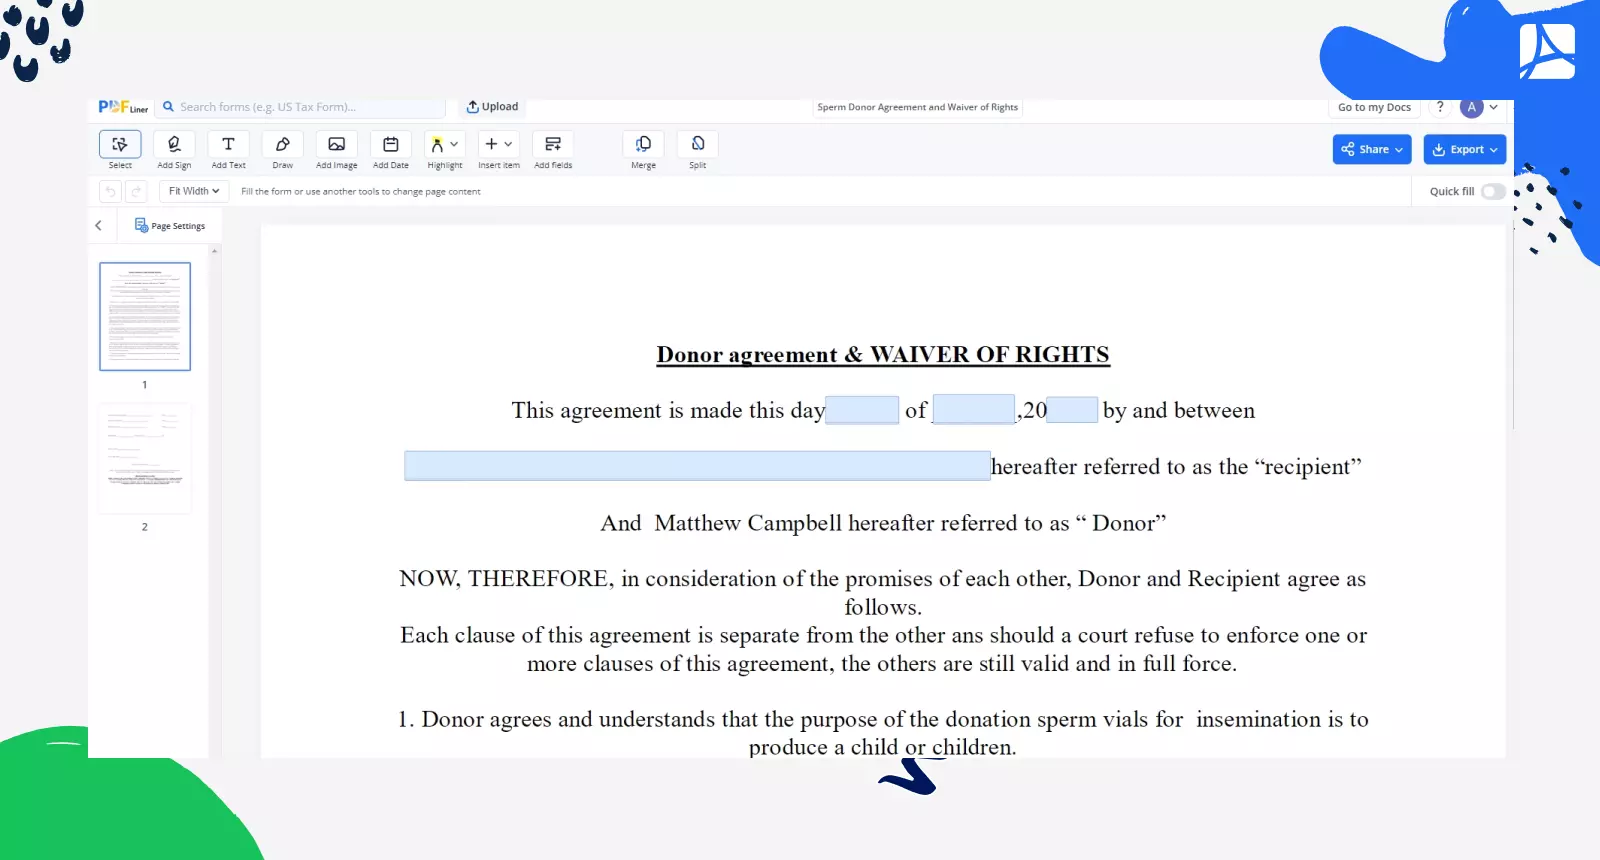 Sperm Donor Agreement and Waiver of Rights screenshot